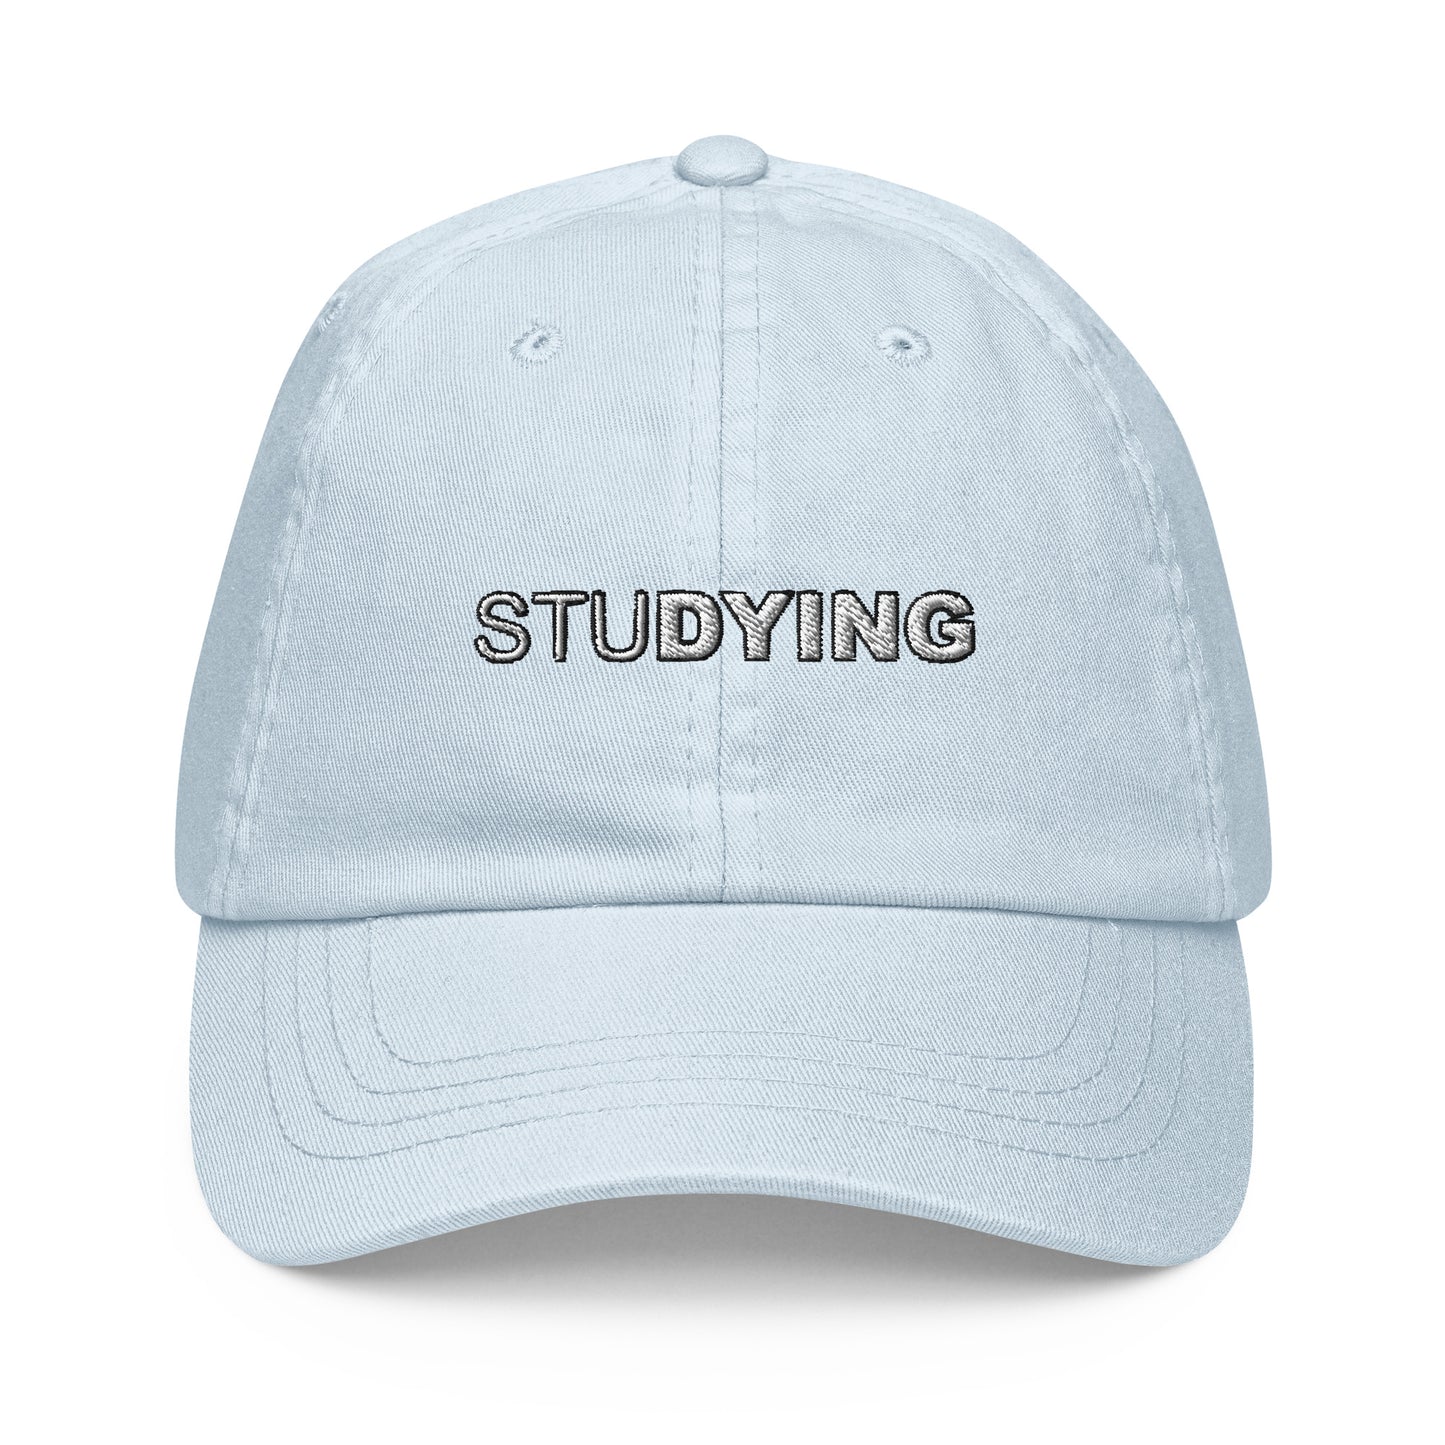 Studying Embroidered Pastel Hat